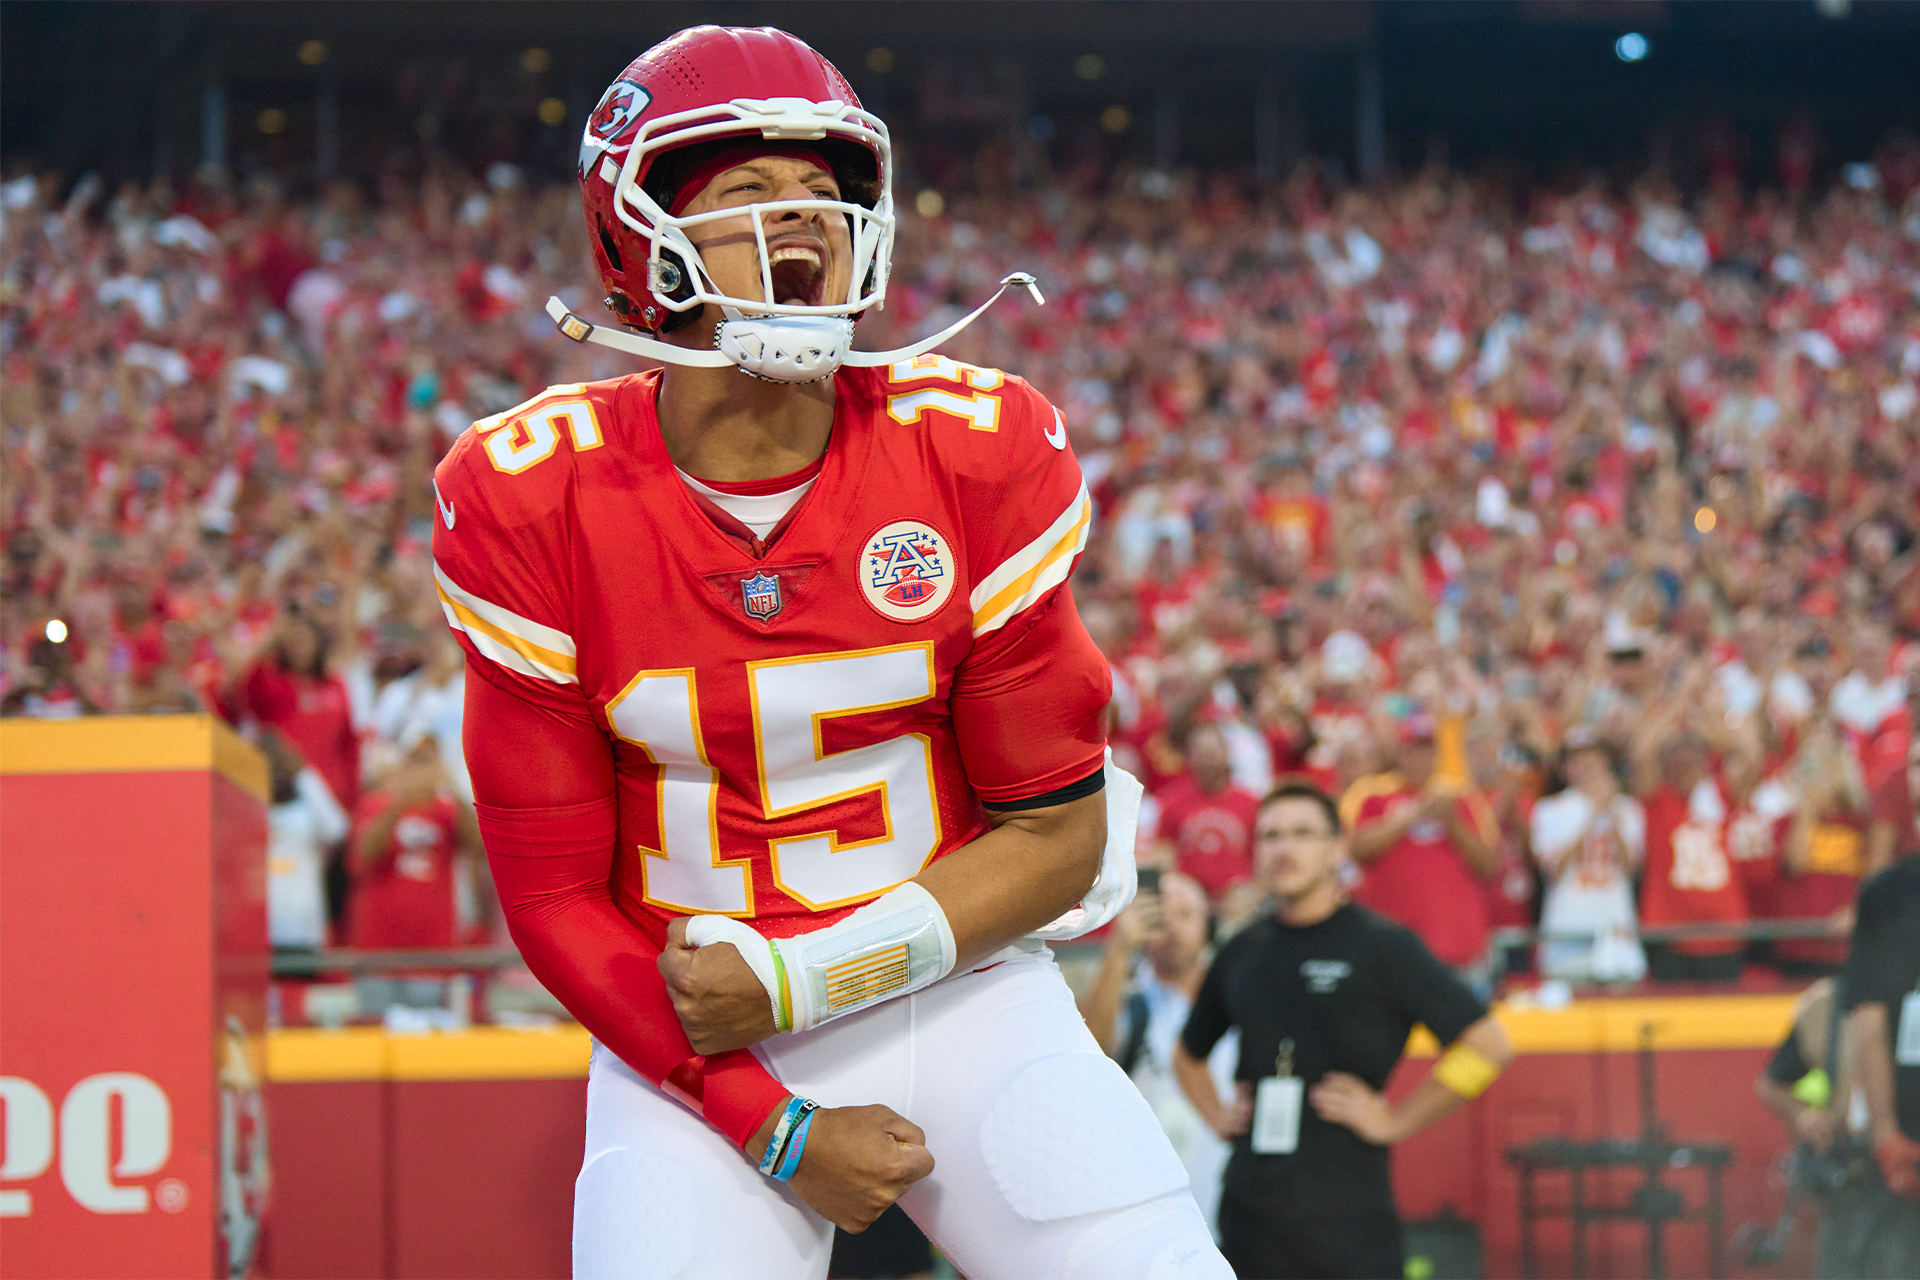 Thursday Night Football — Lions vs. Chiefs: How to watch, game